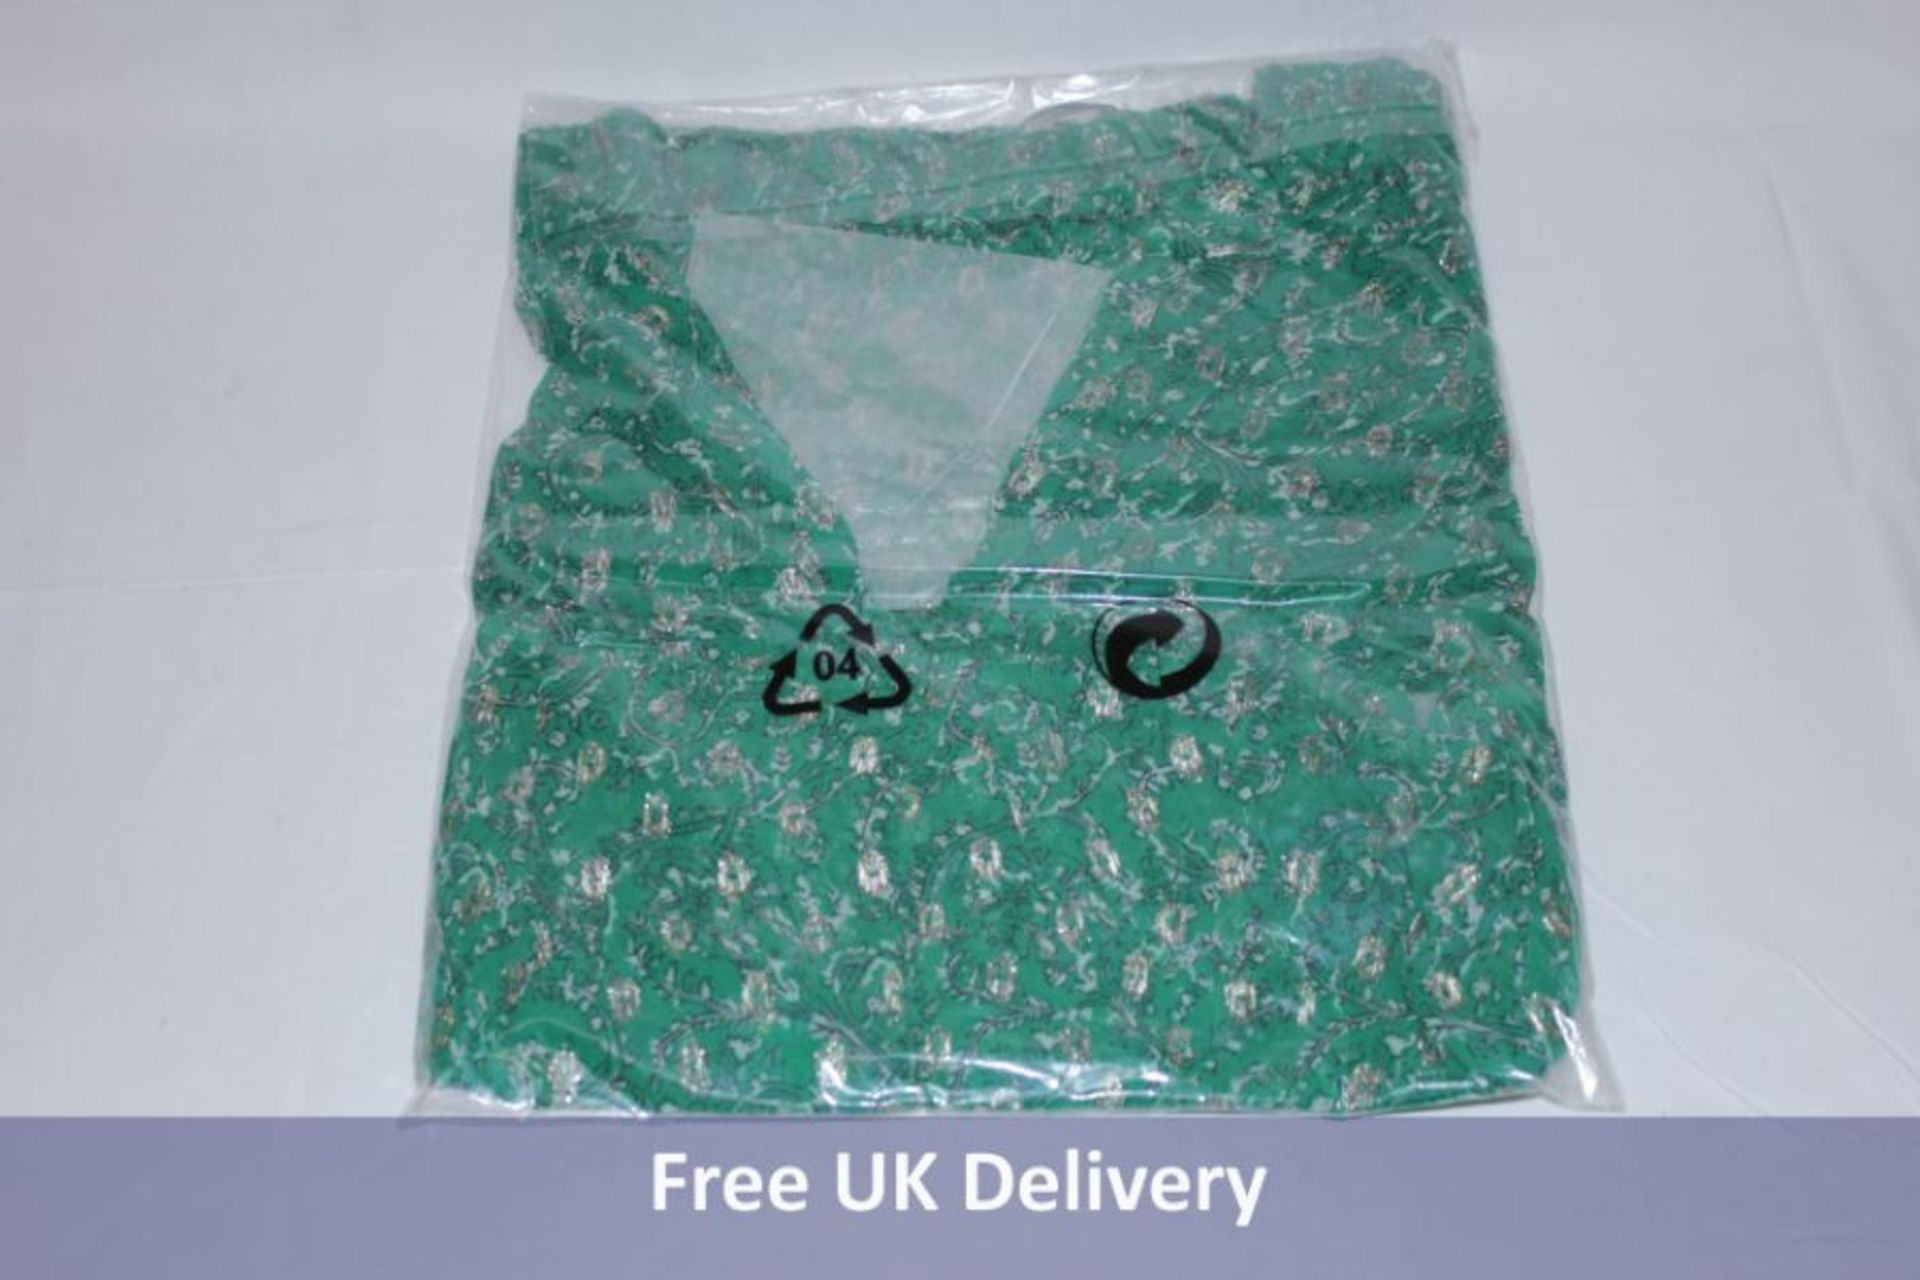 Lolly's Laundry Collection to include 1x Helena Shirt, Dark Green, L, 1x Helena Shirt, Dark Green, M